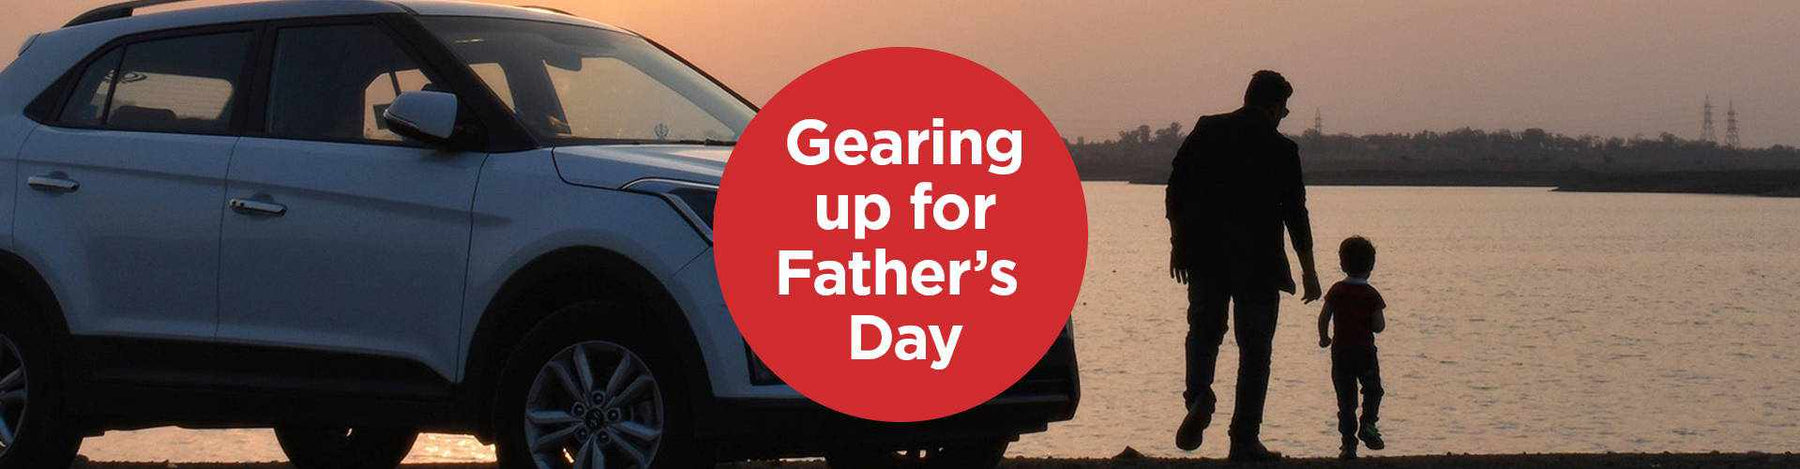 Gearing up for Father's Day -  - BlackboxMyCar Canada